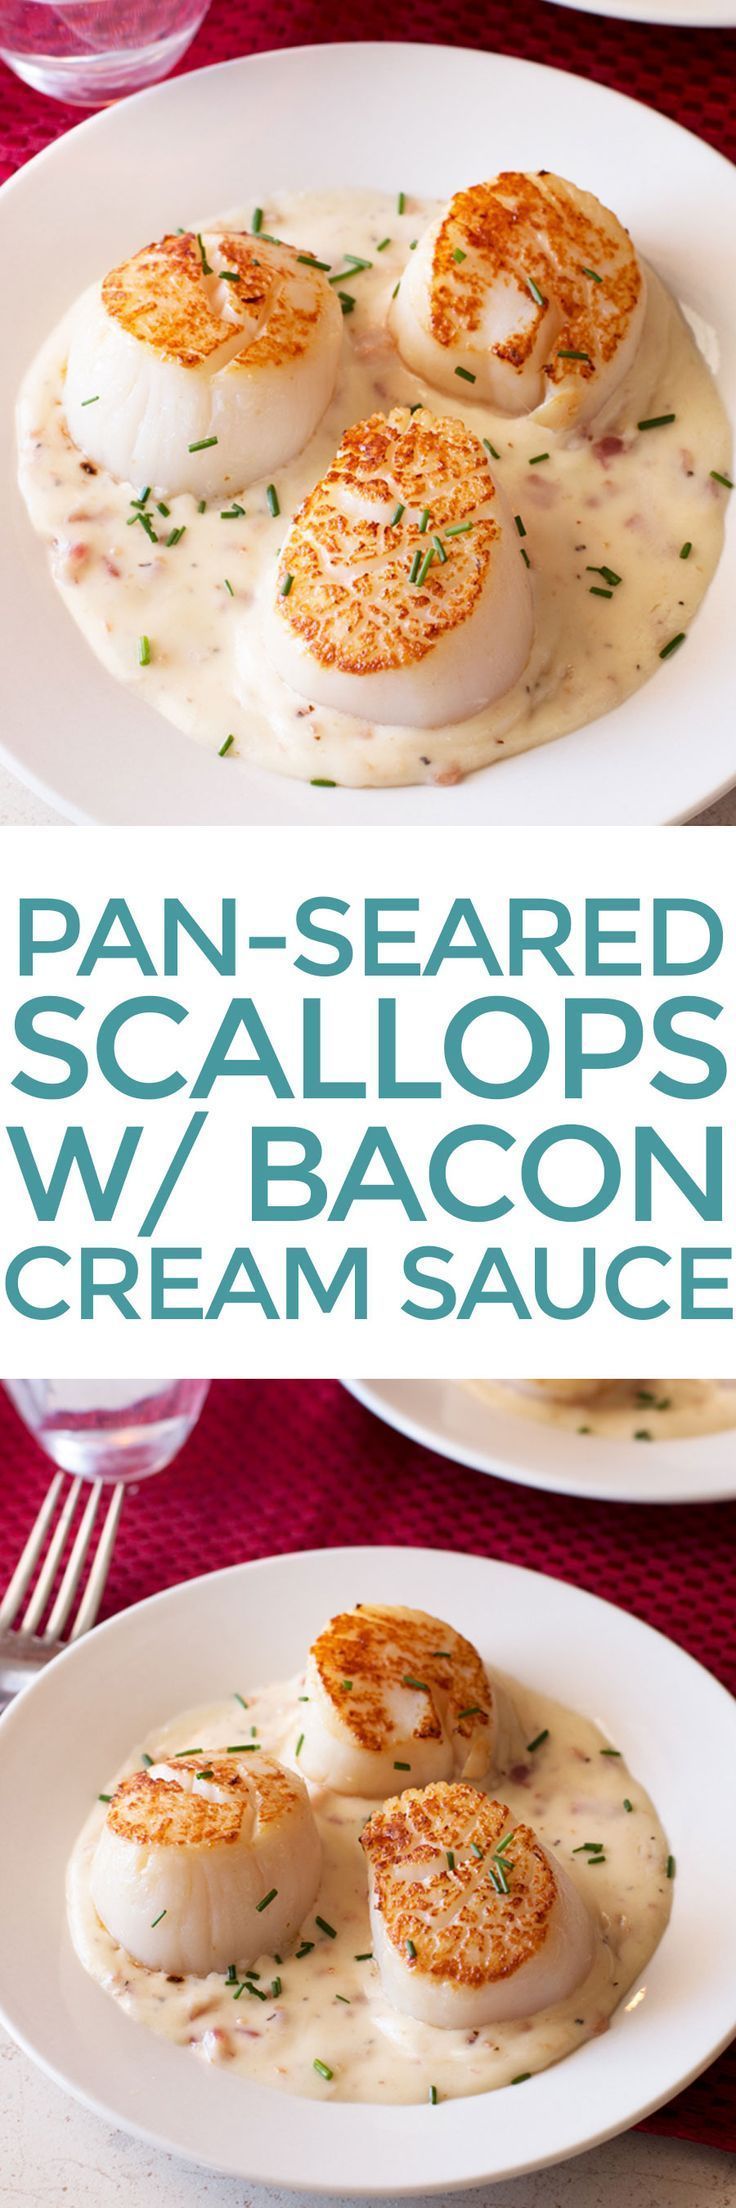 Pan-Seared Scallops with Bacon and a Cream Sauce | Full of flavor and low carb makes this a delicious keto meal. cakenknife.com